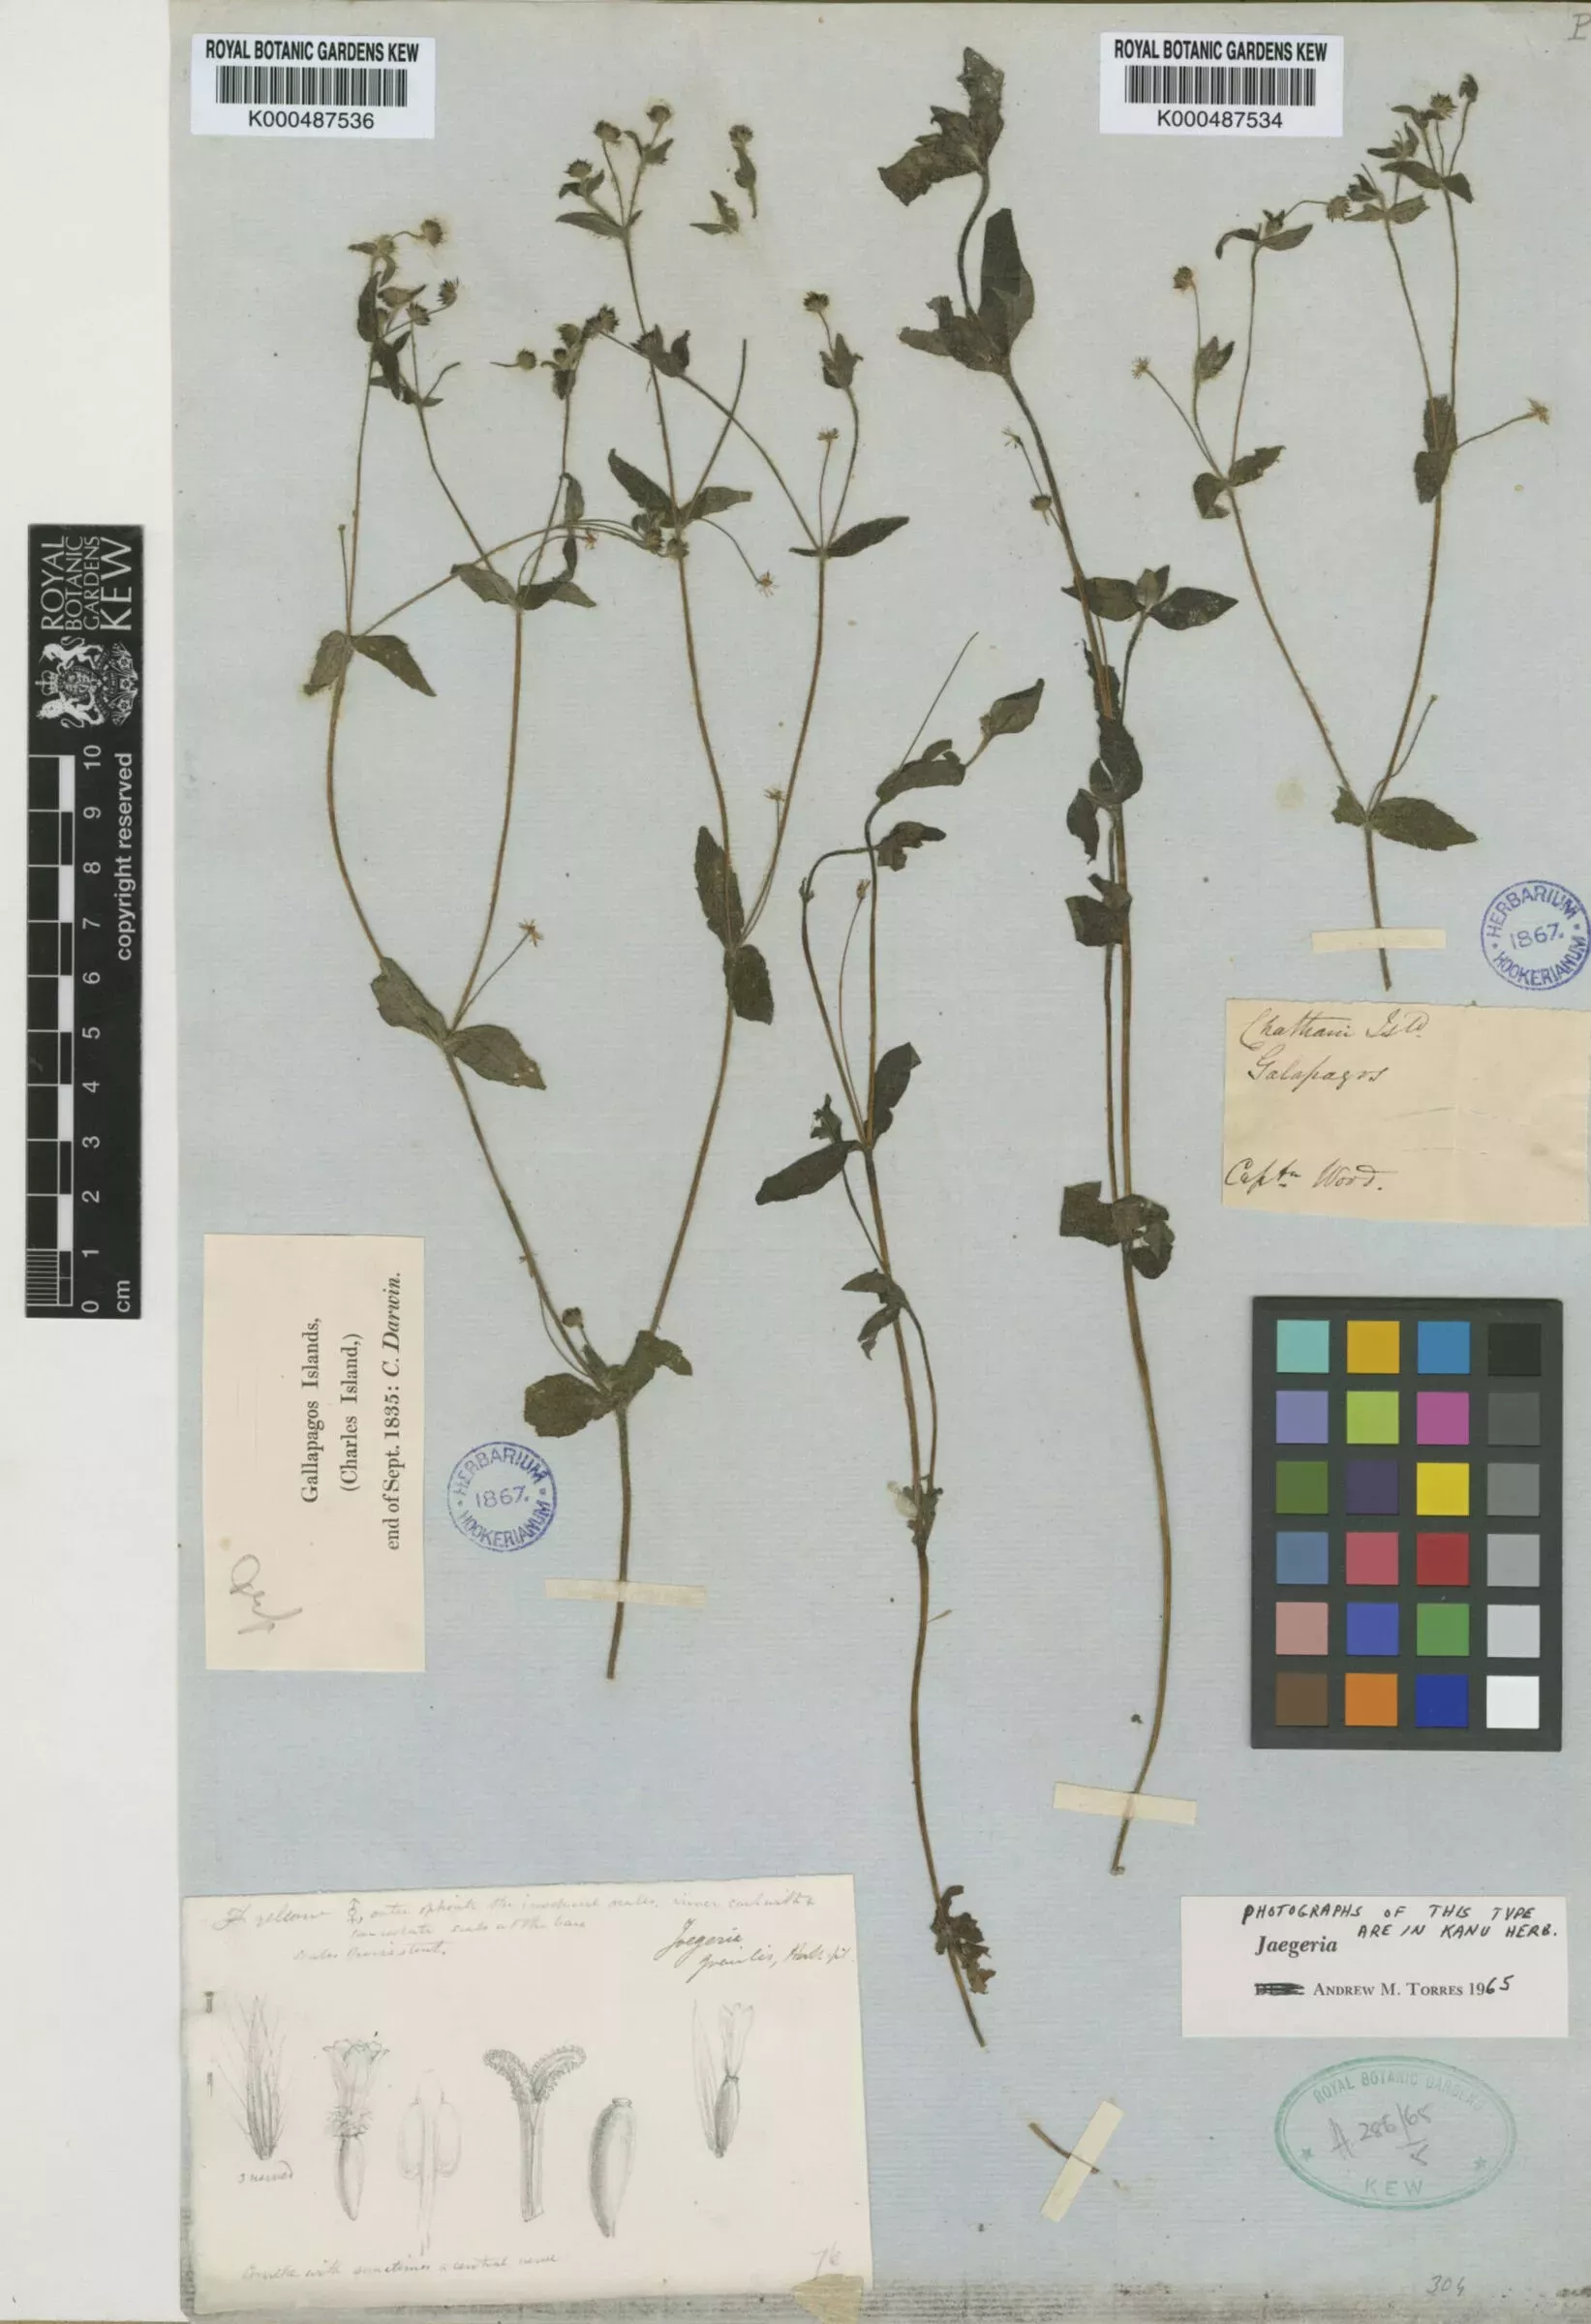 Specimen collected by Charles Darwin that includes a drawing by Joseph Hooker